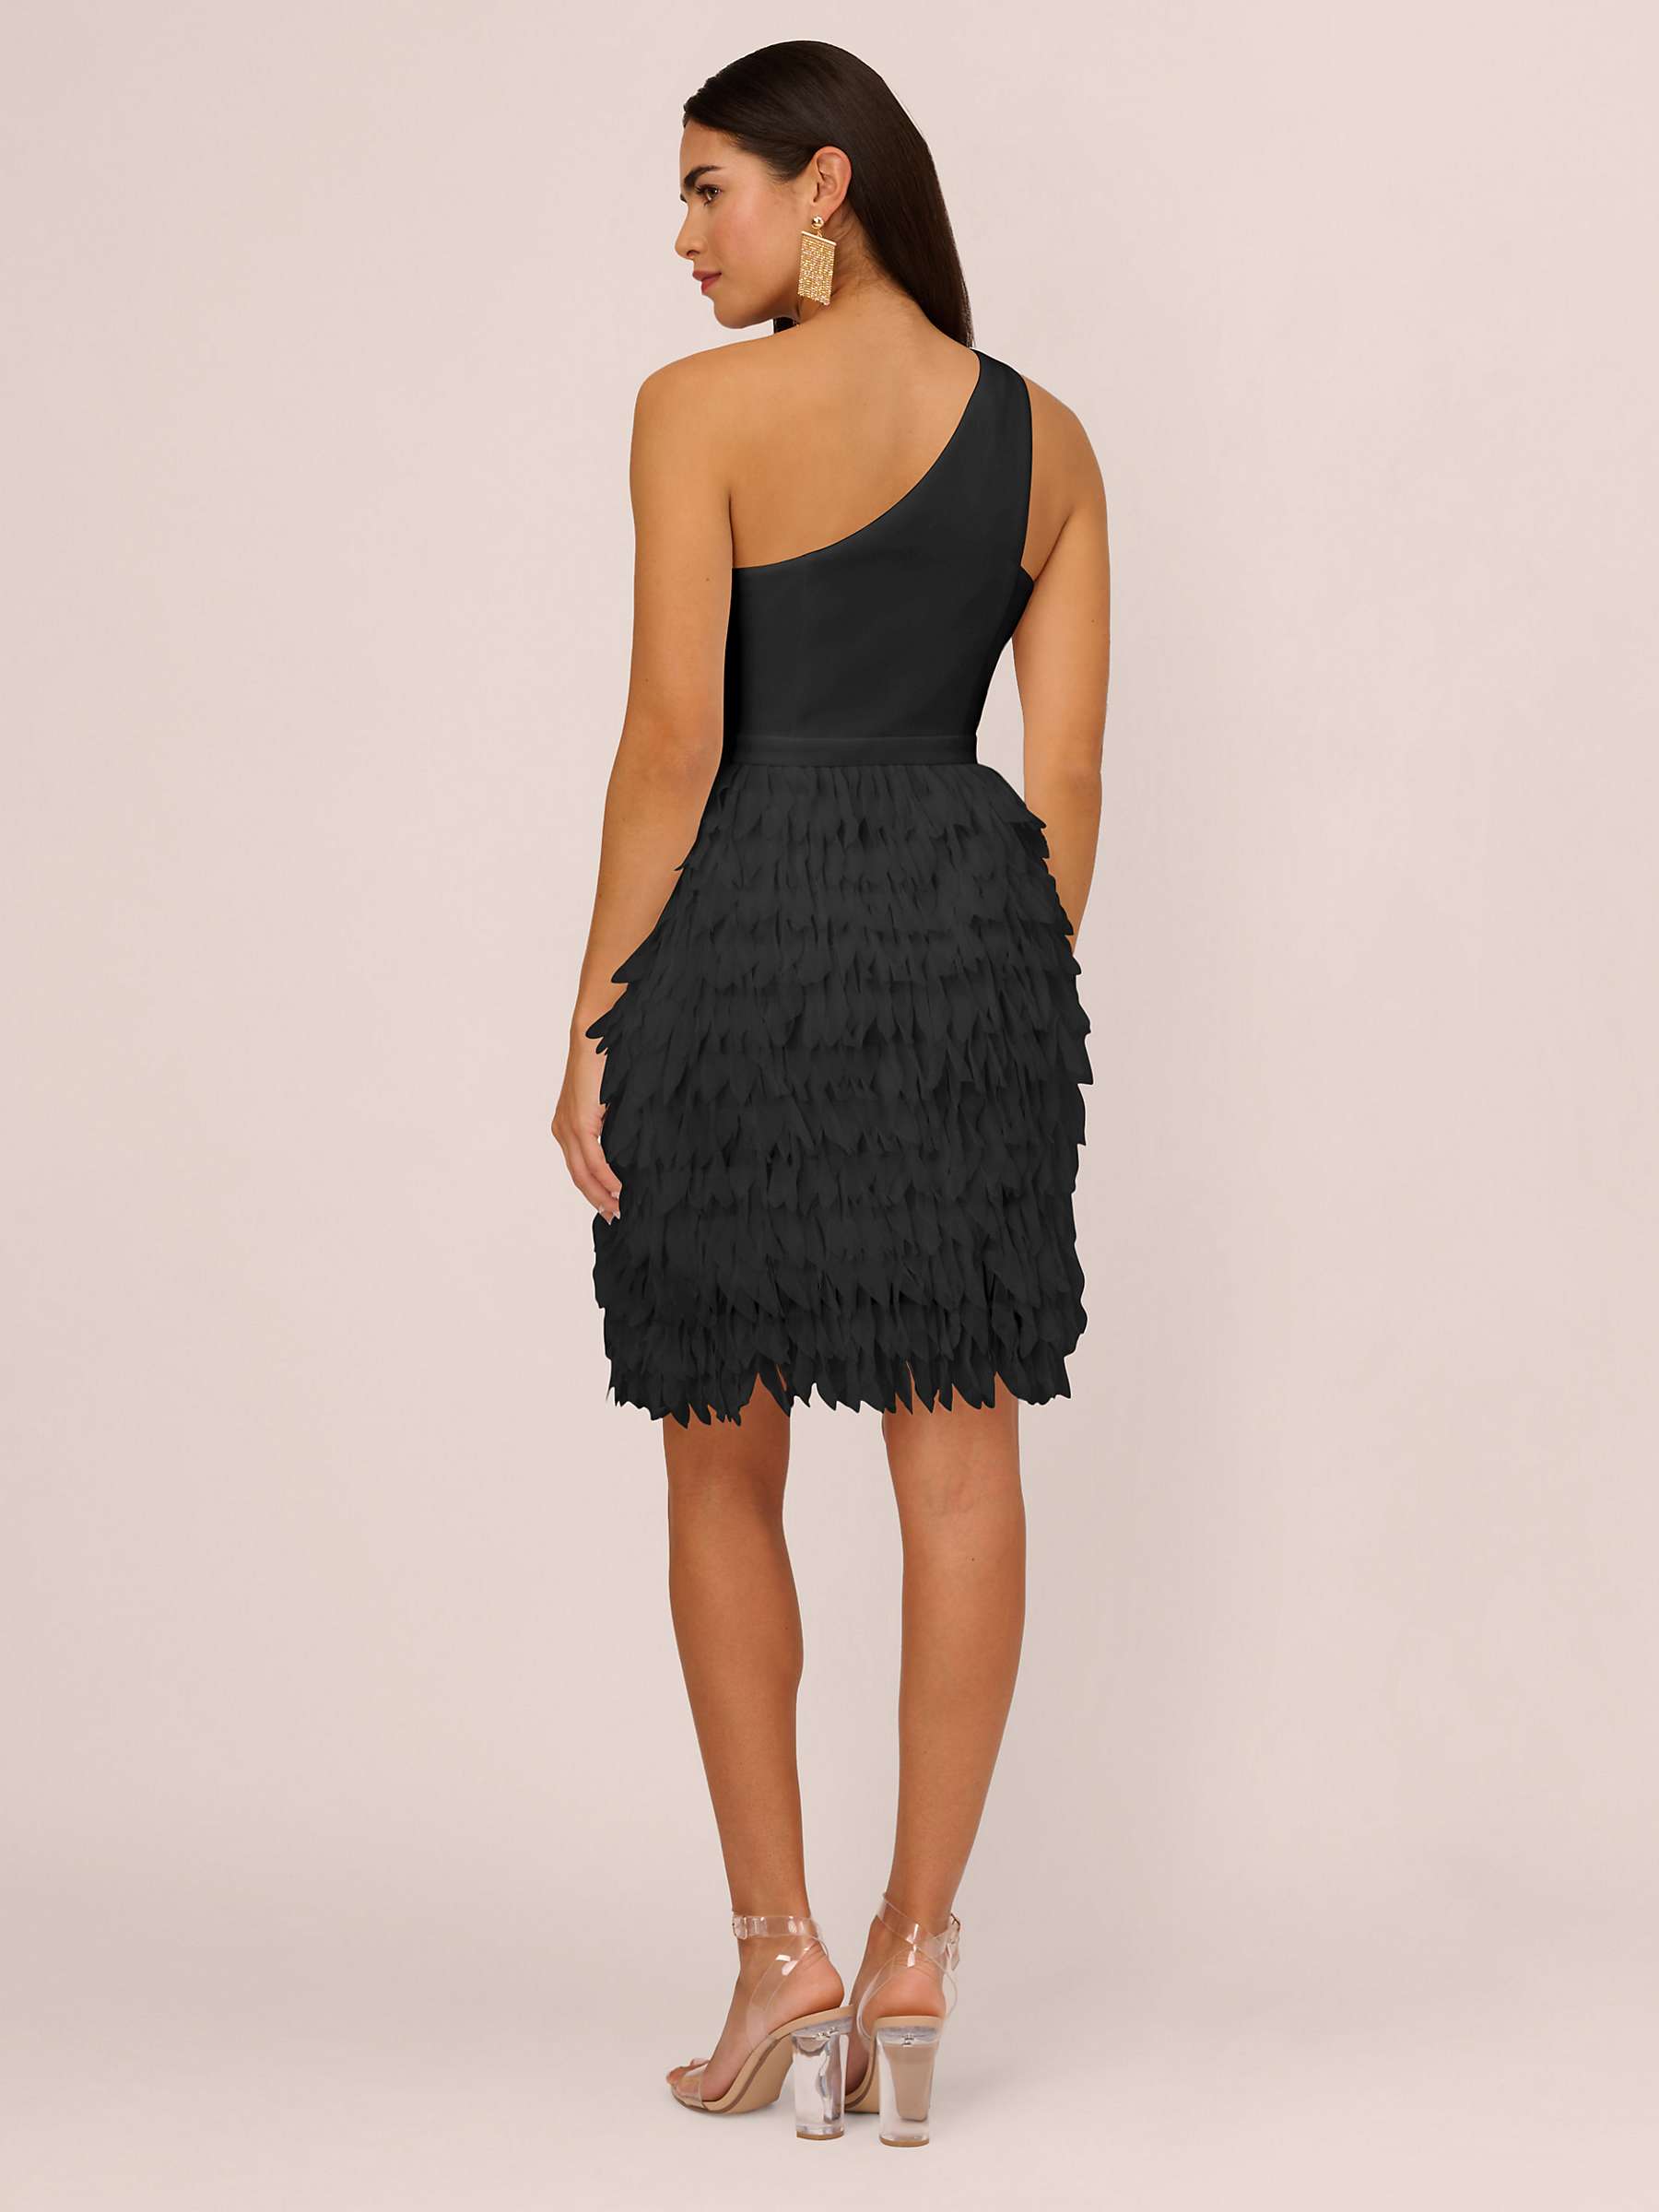 Buy Aidan by Adrianna Papell Chiffon Feather Cocktail Dress, Black Online at johnlewis.com